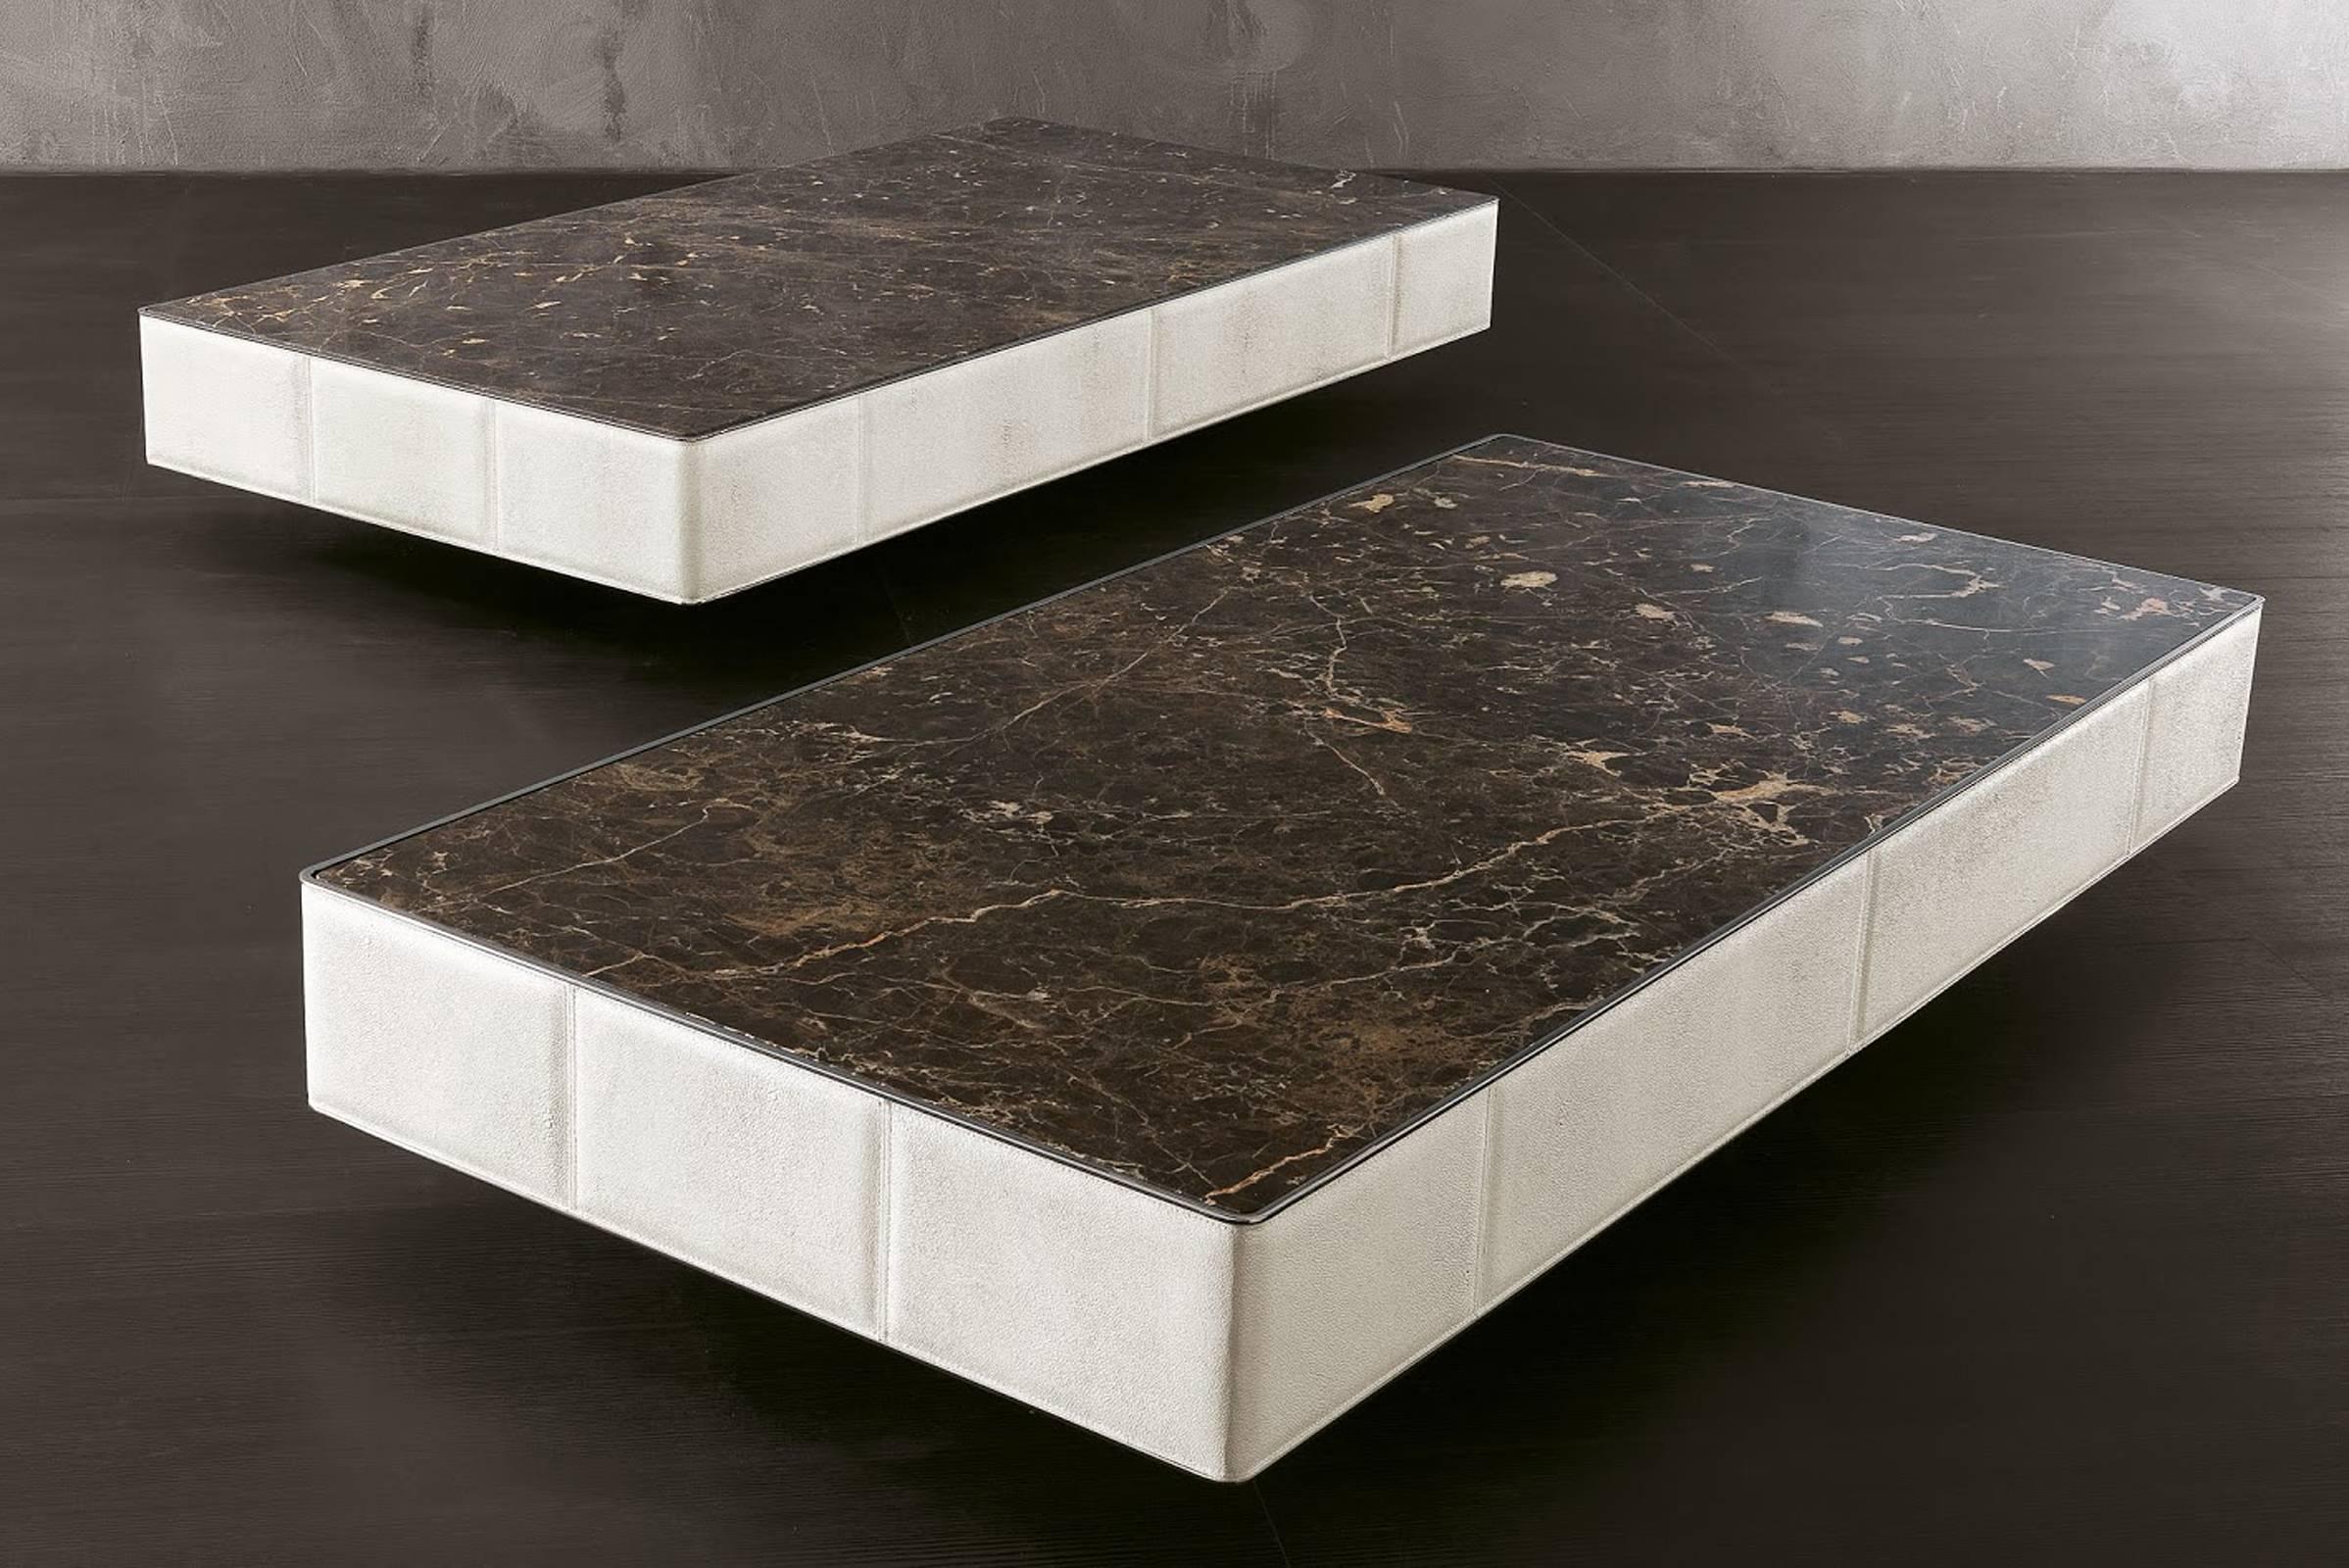 Rectangular coffee table Walter A quilted structure with leather category C.
Top in marble. Top available in leather, glass or customer's choice.
Structure is quilted with leather Cat. B or C.
Can be made with customer dimensions and finish.
